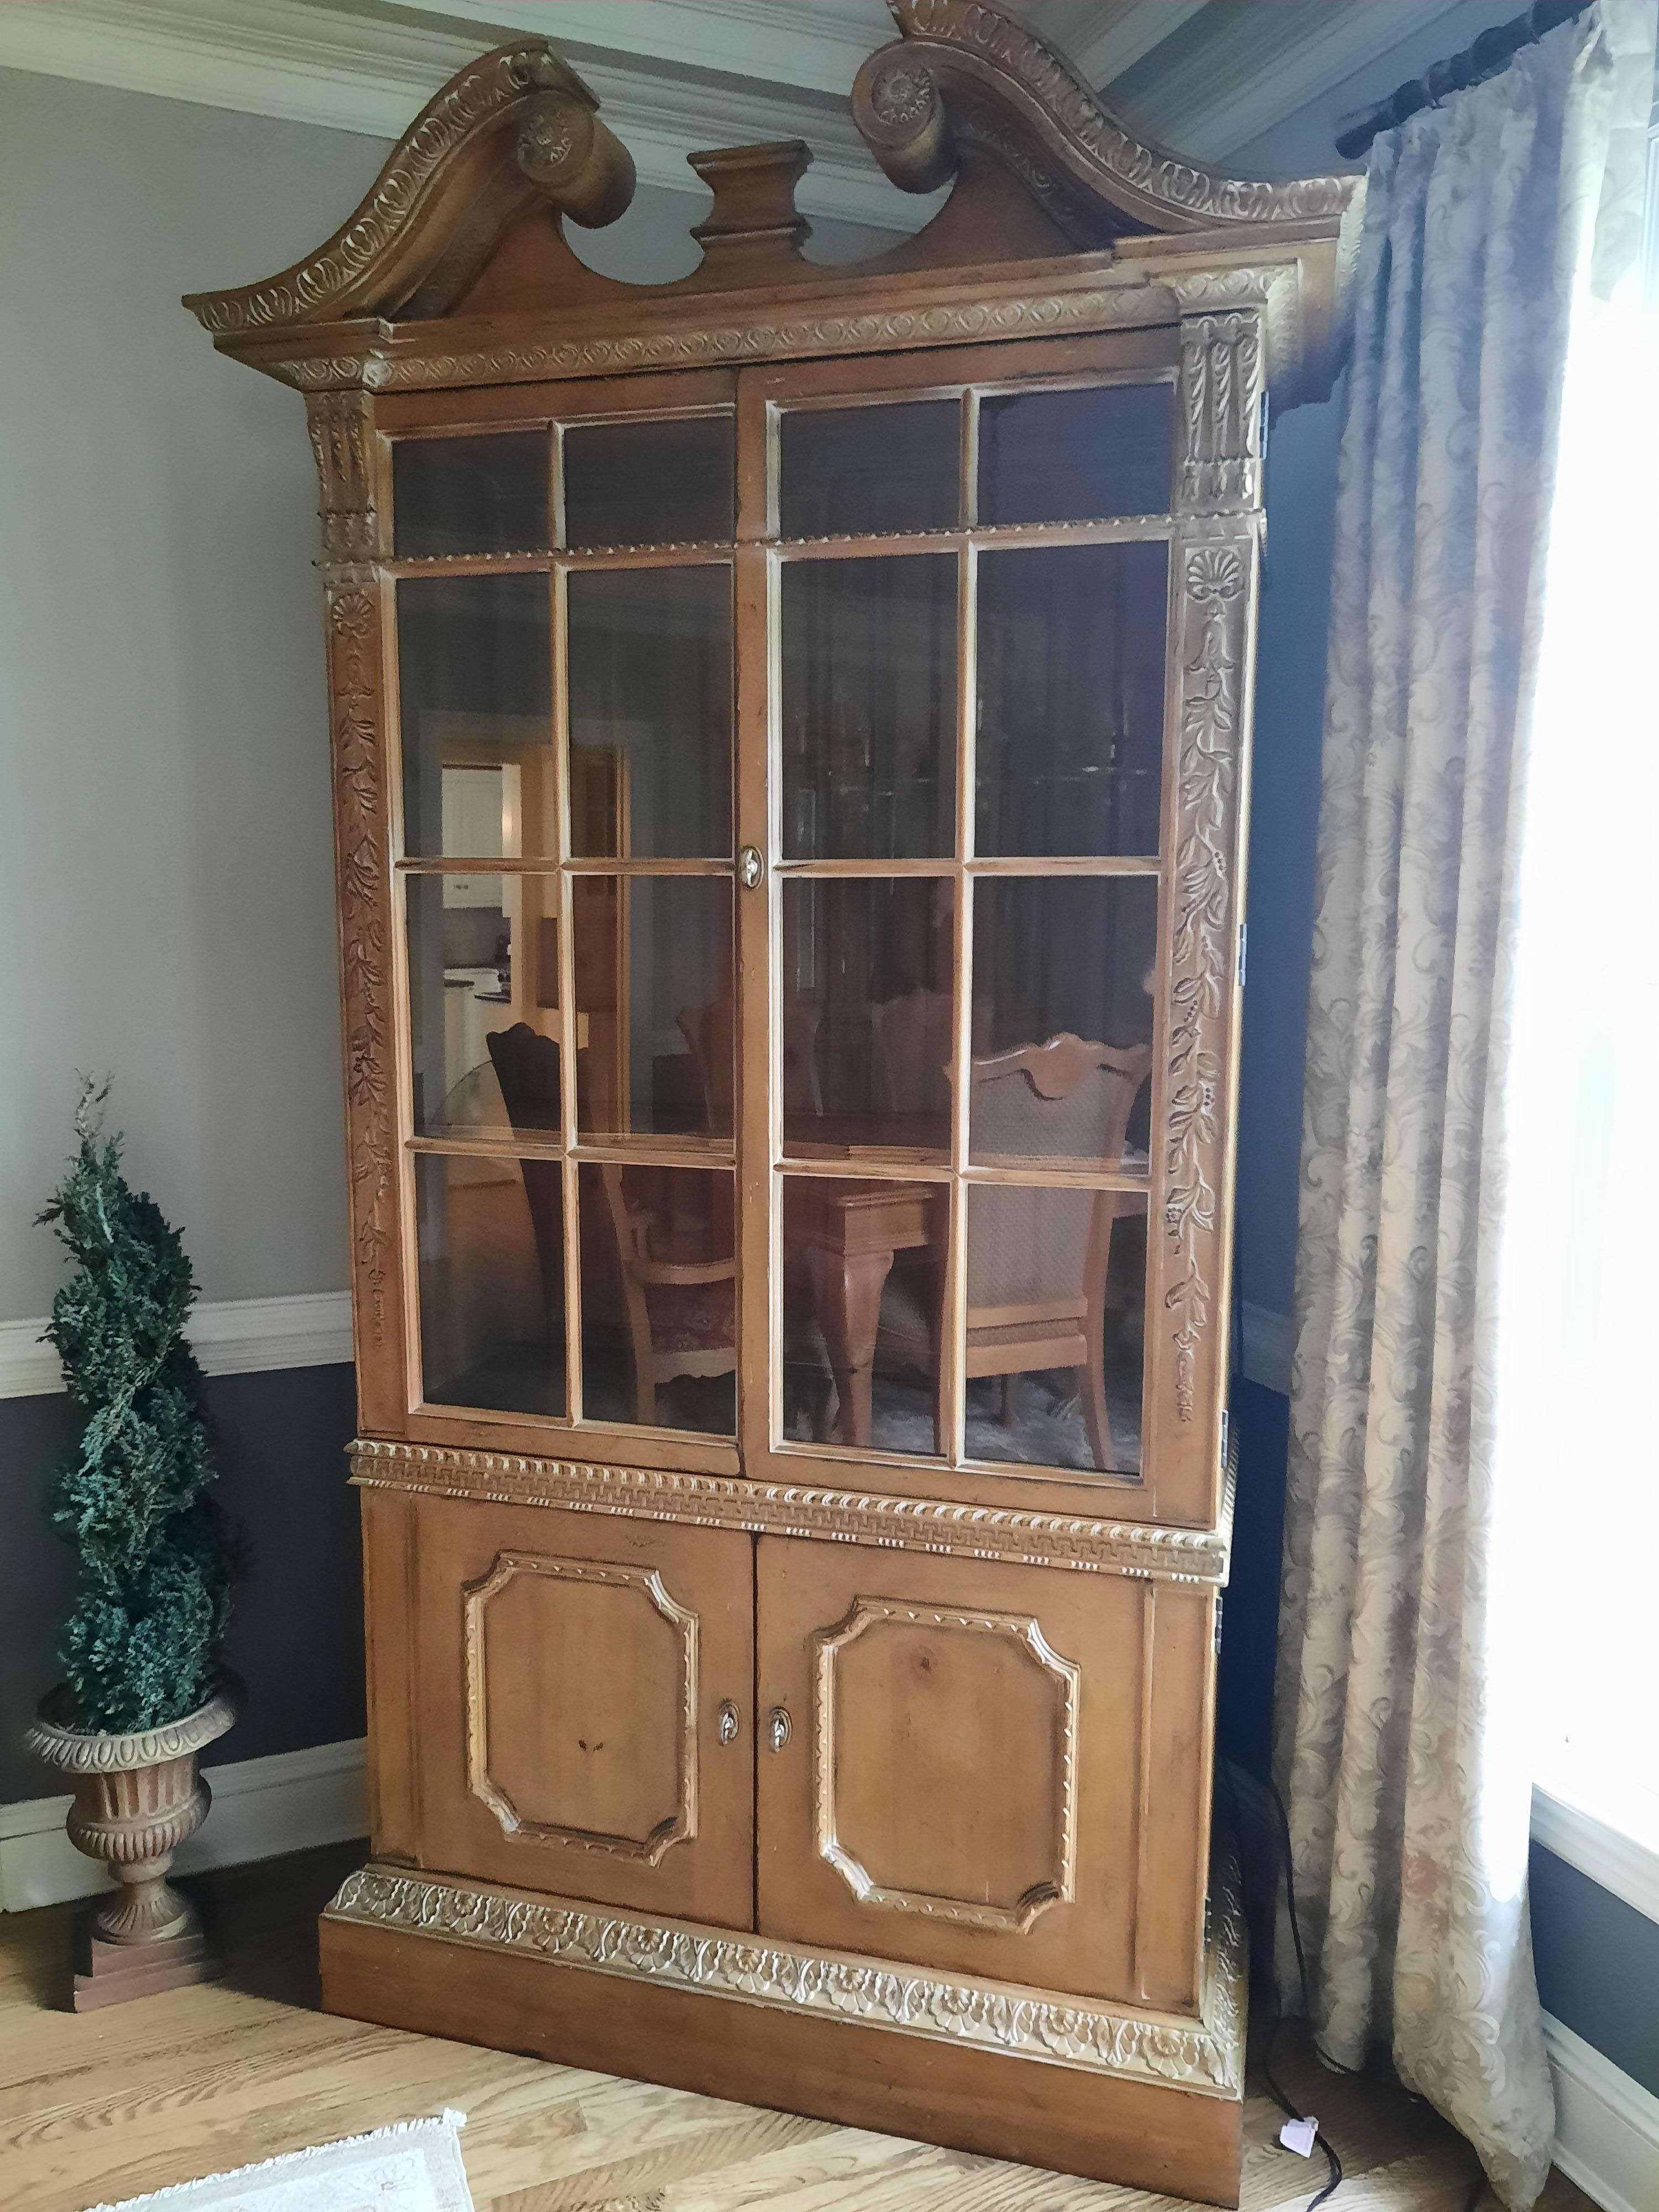 Vintage solid hardwood Hutch with 4 doors white washed to accent the carved details. Top has two doors with glass and two adjustable shelves with scalloped fronts. The bottom has one adjustable shelf and a drawer. There is strip lighting on both